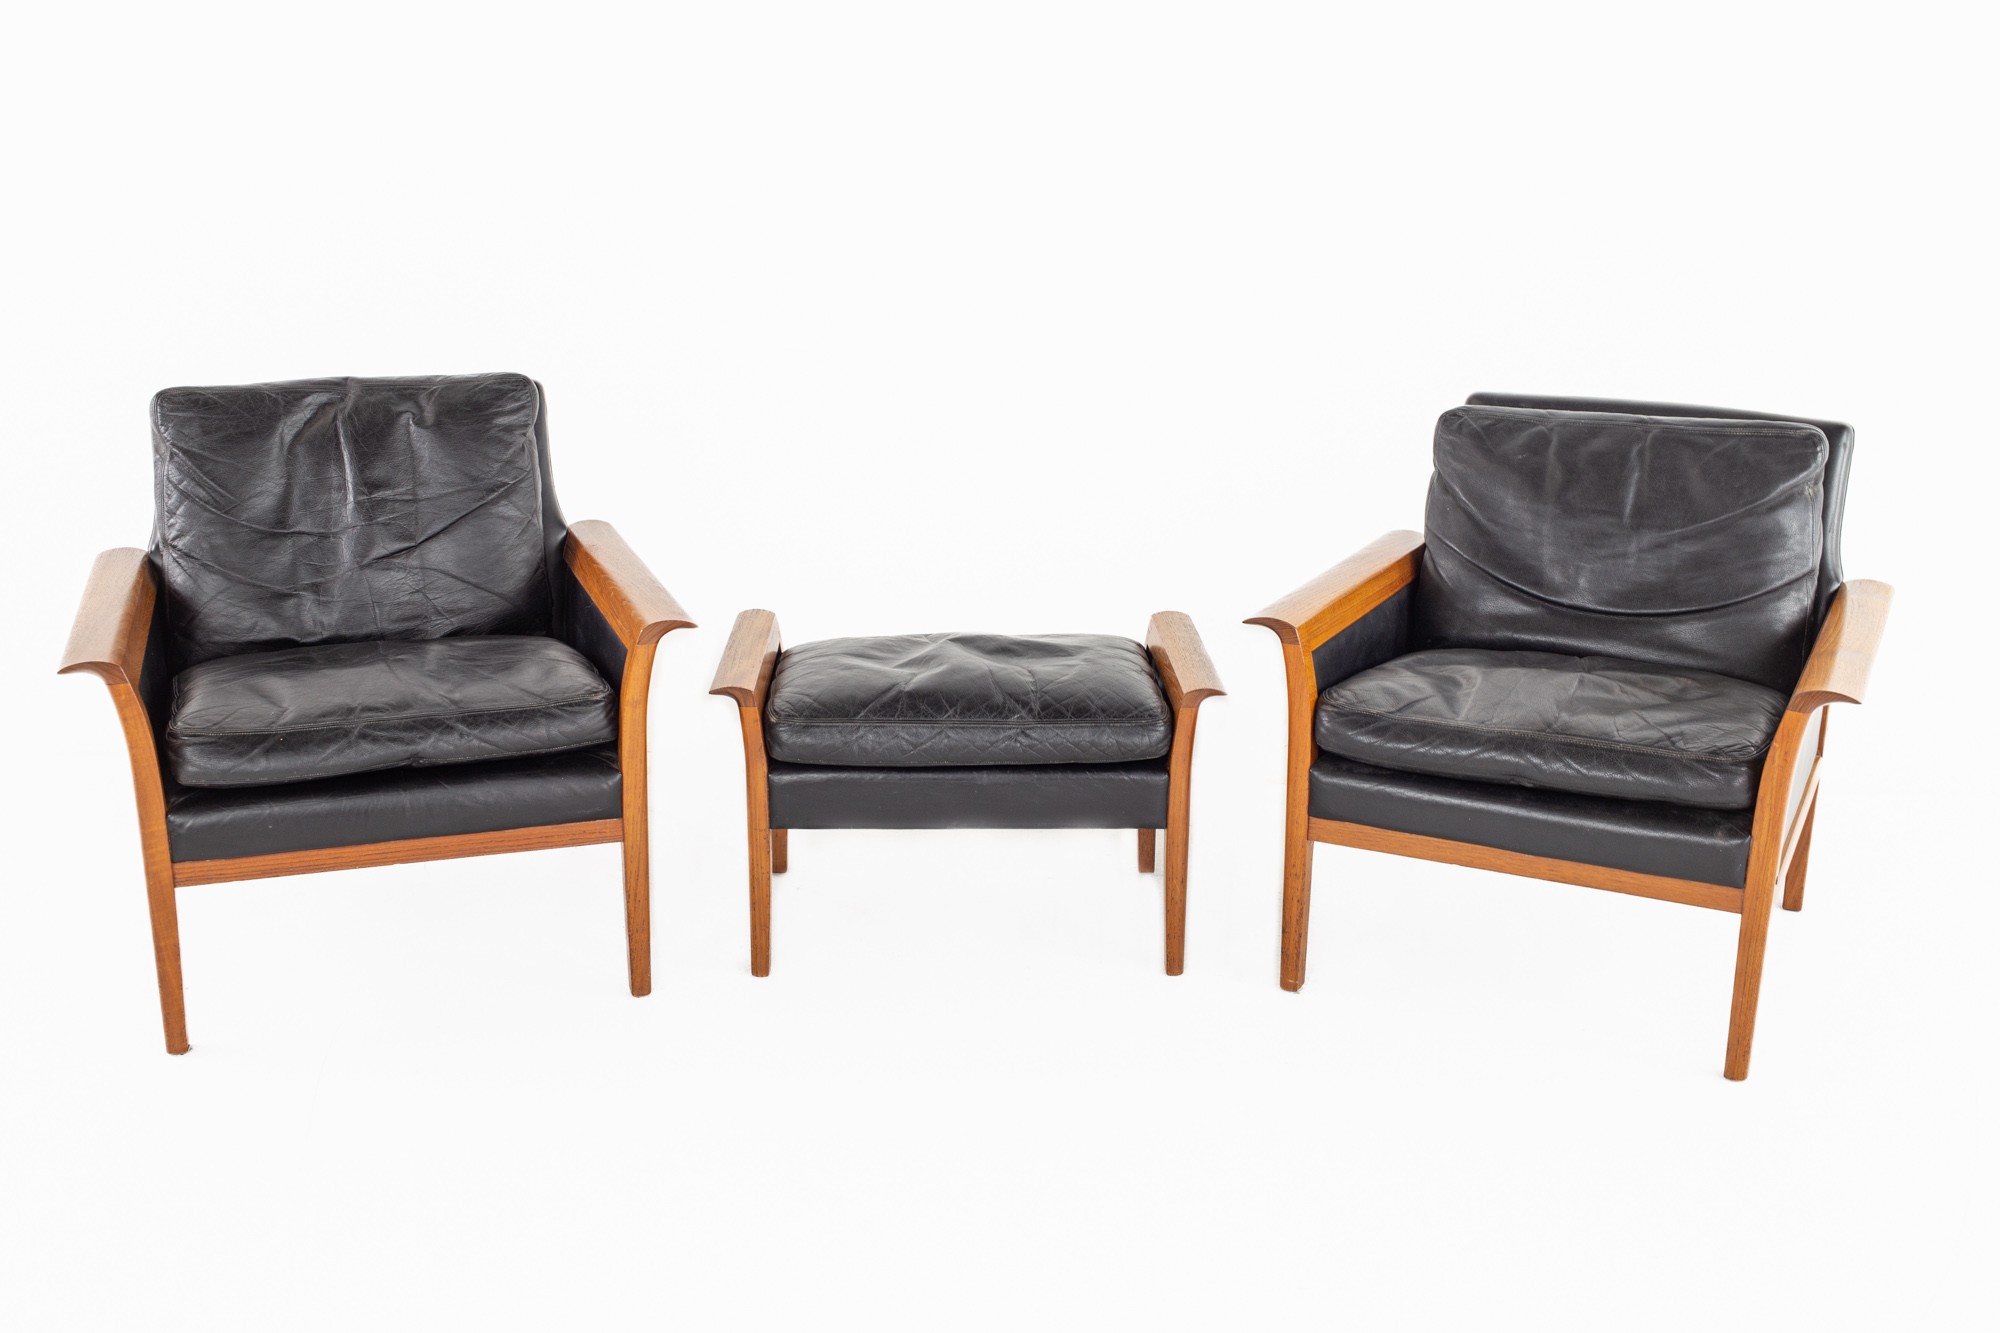 Knut Sæter for Vatne Mobler Mid Century Teak and Black Leather Chair and Ottoman Set